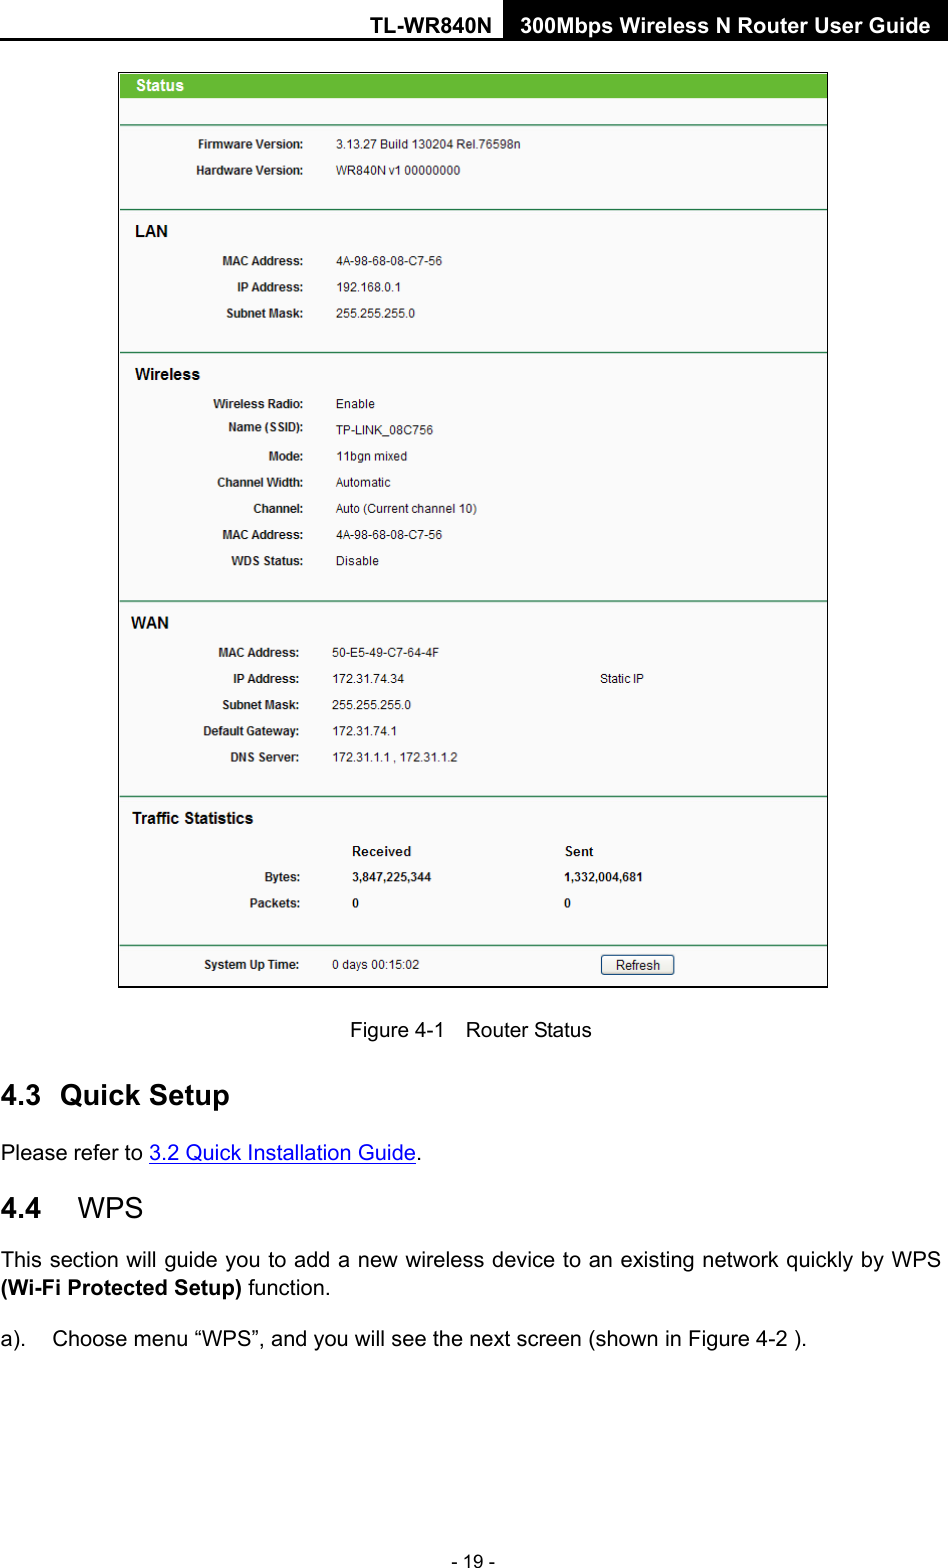 TL-WR840N 300Mbps Wireless N Router User Guide  - 19 -  Figure 4-1  Router Status 4.3 Quick Setup Please refer to 3.2 Quick Installation Guide. 4.4 WPS This section will guide you to add a new wireless device to an existing network quickly by WPS (Wi-Fi Protected Setup) function.   a). Choose menu “WPS”, and you will see the next screen (shown in Figure 4-2 ).   